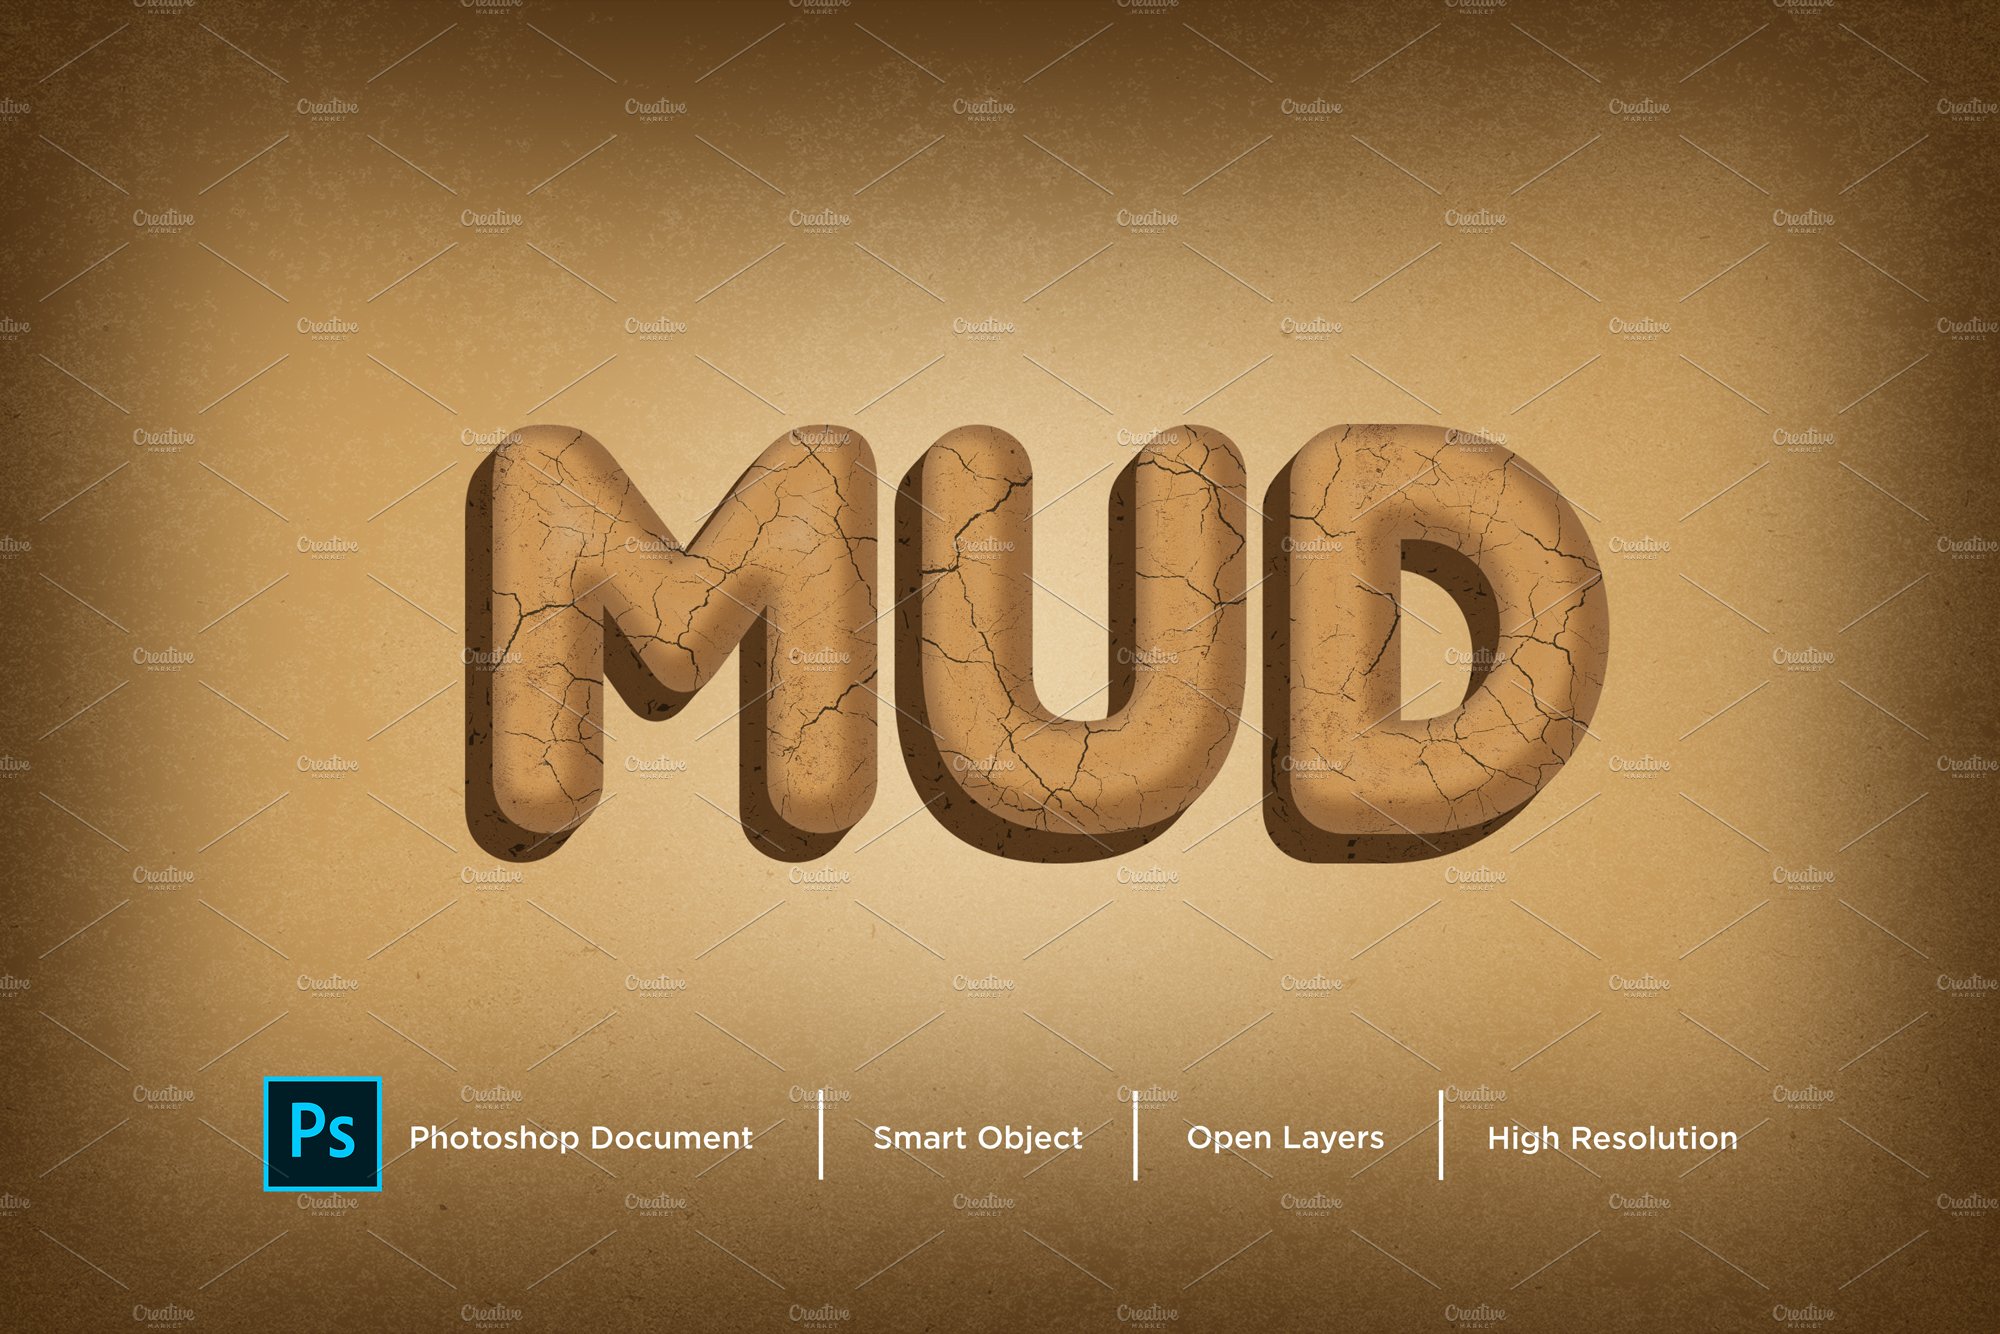 Mud Text Effect & Layer Stylecover image.